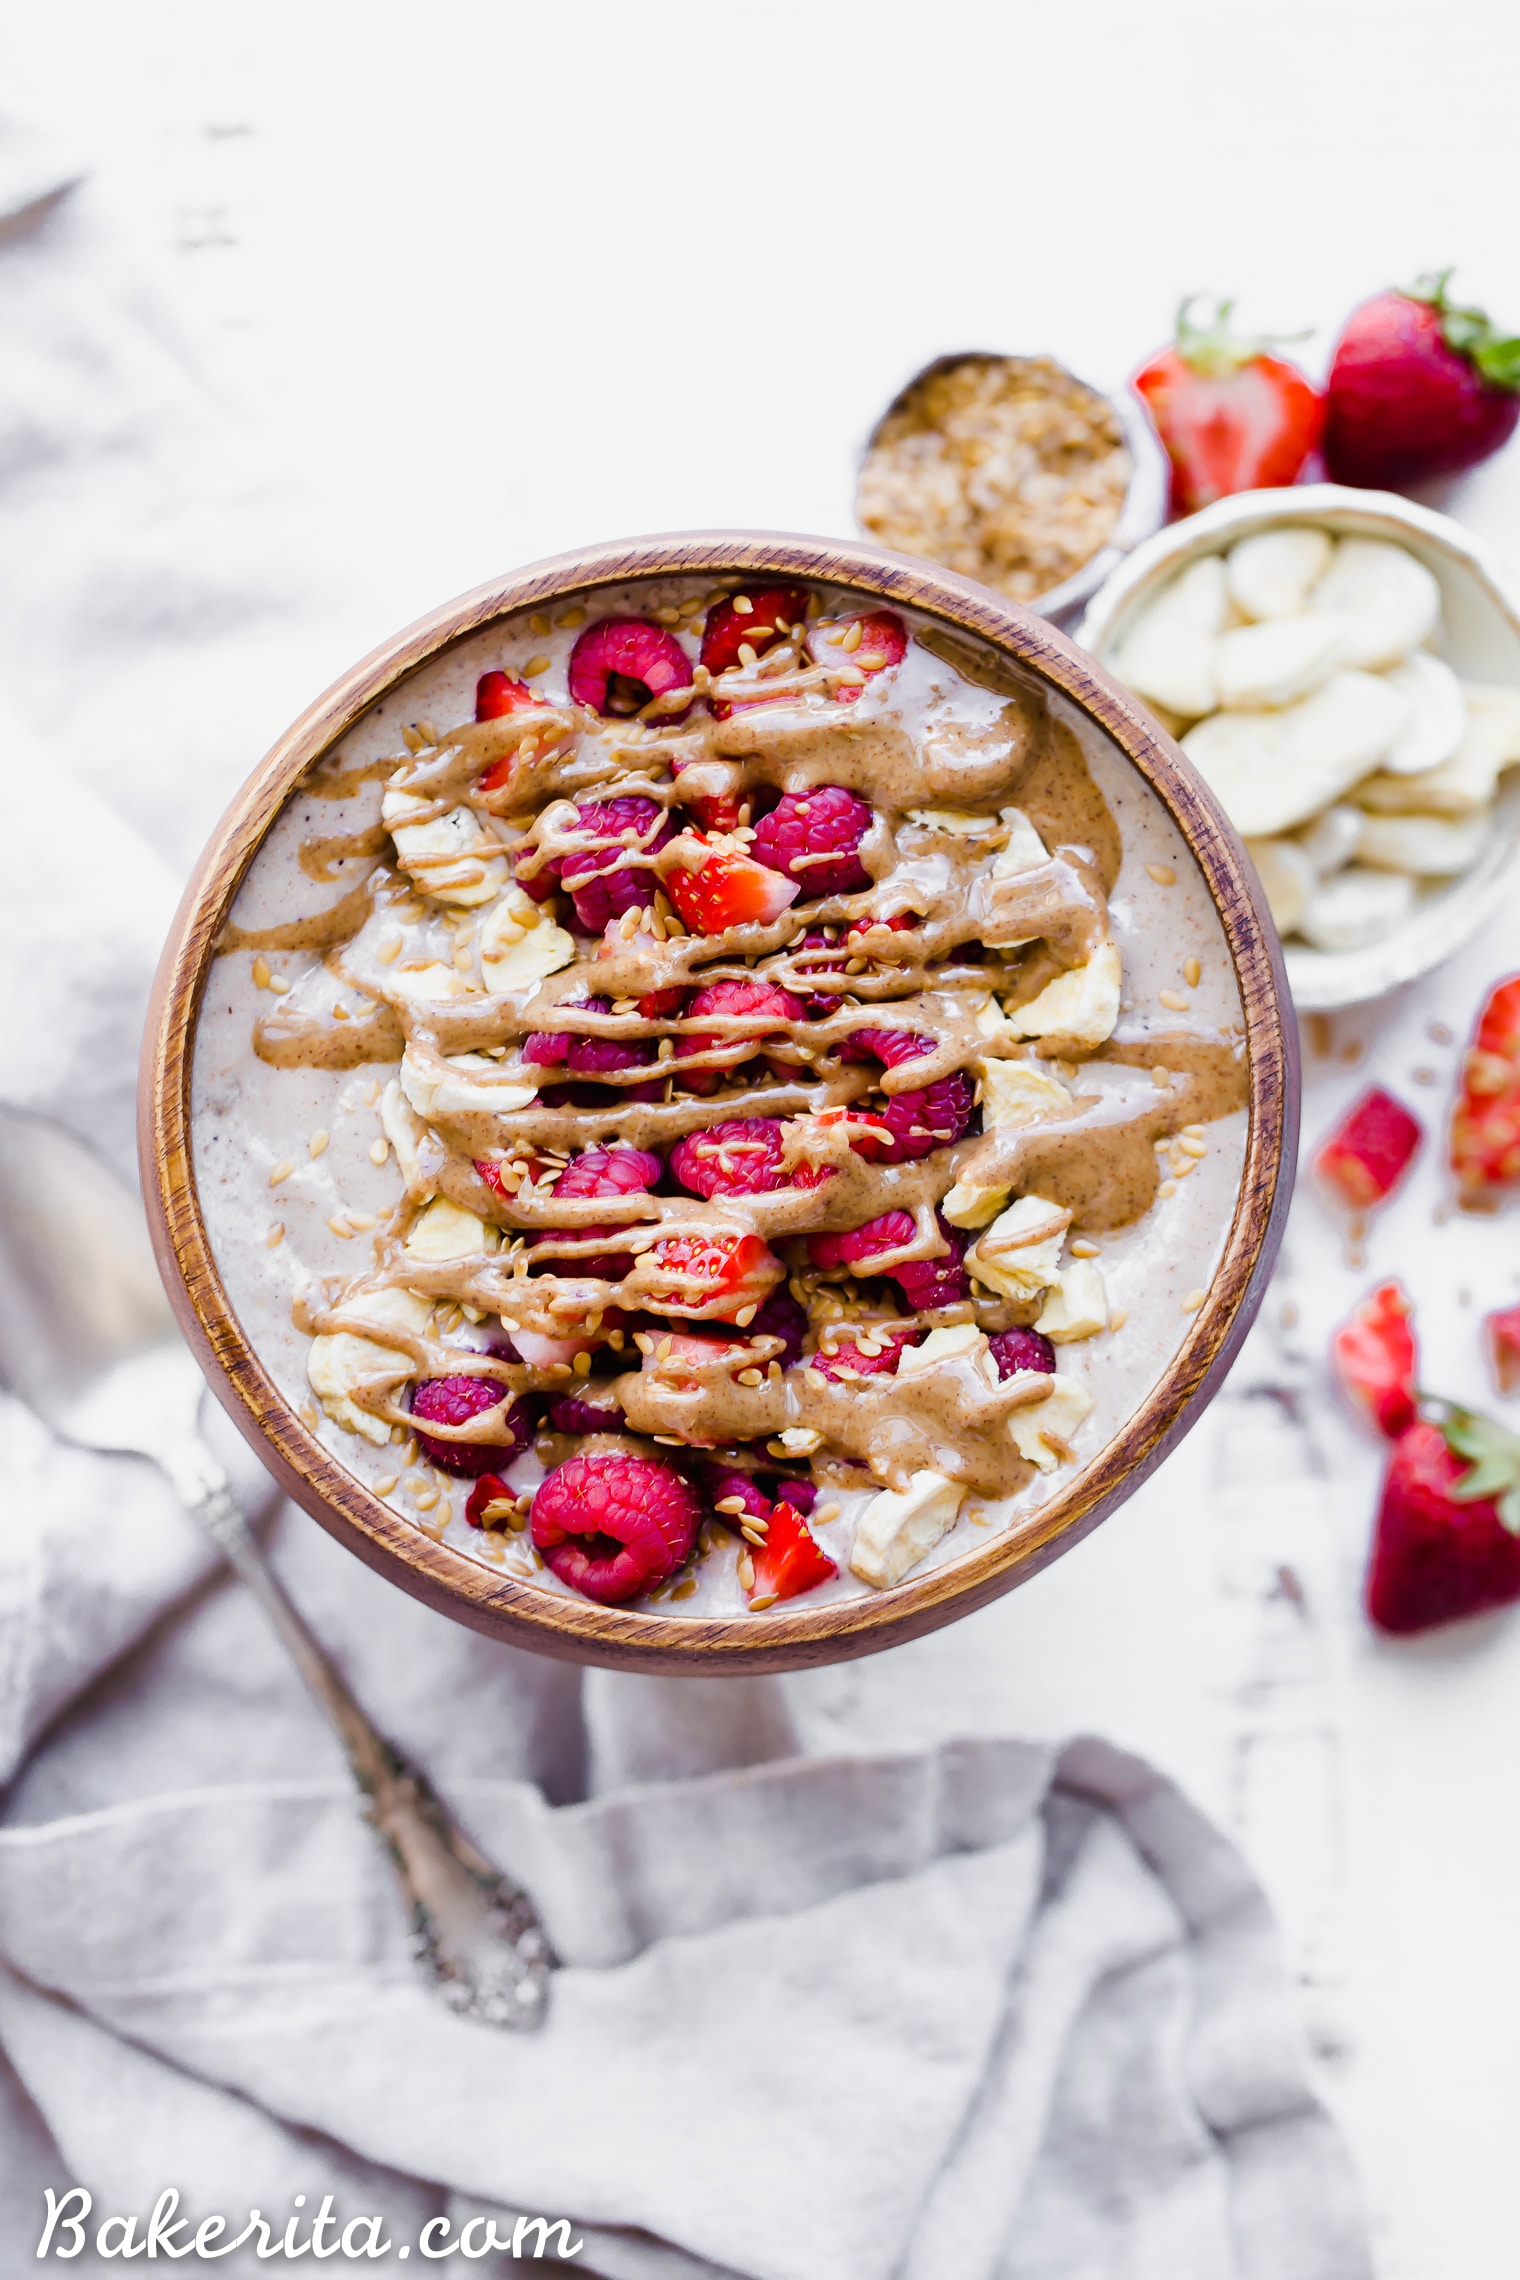 This Banana Date Smoothie Bowl (or smoothie) is a creamy and sweet treat that tastes like ice cream but is simple and healthy enough for breakfast thanks to a secret veggie that's snuck in there. Make yourself a bowl of this paleo and vegan banana date goodness on the next warm morning for a refreshing breakfast.